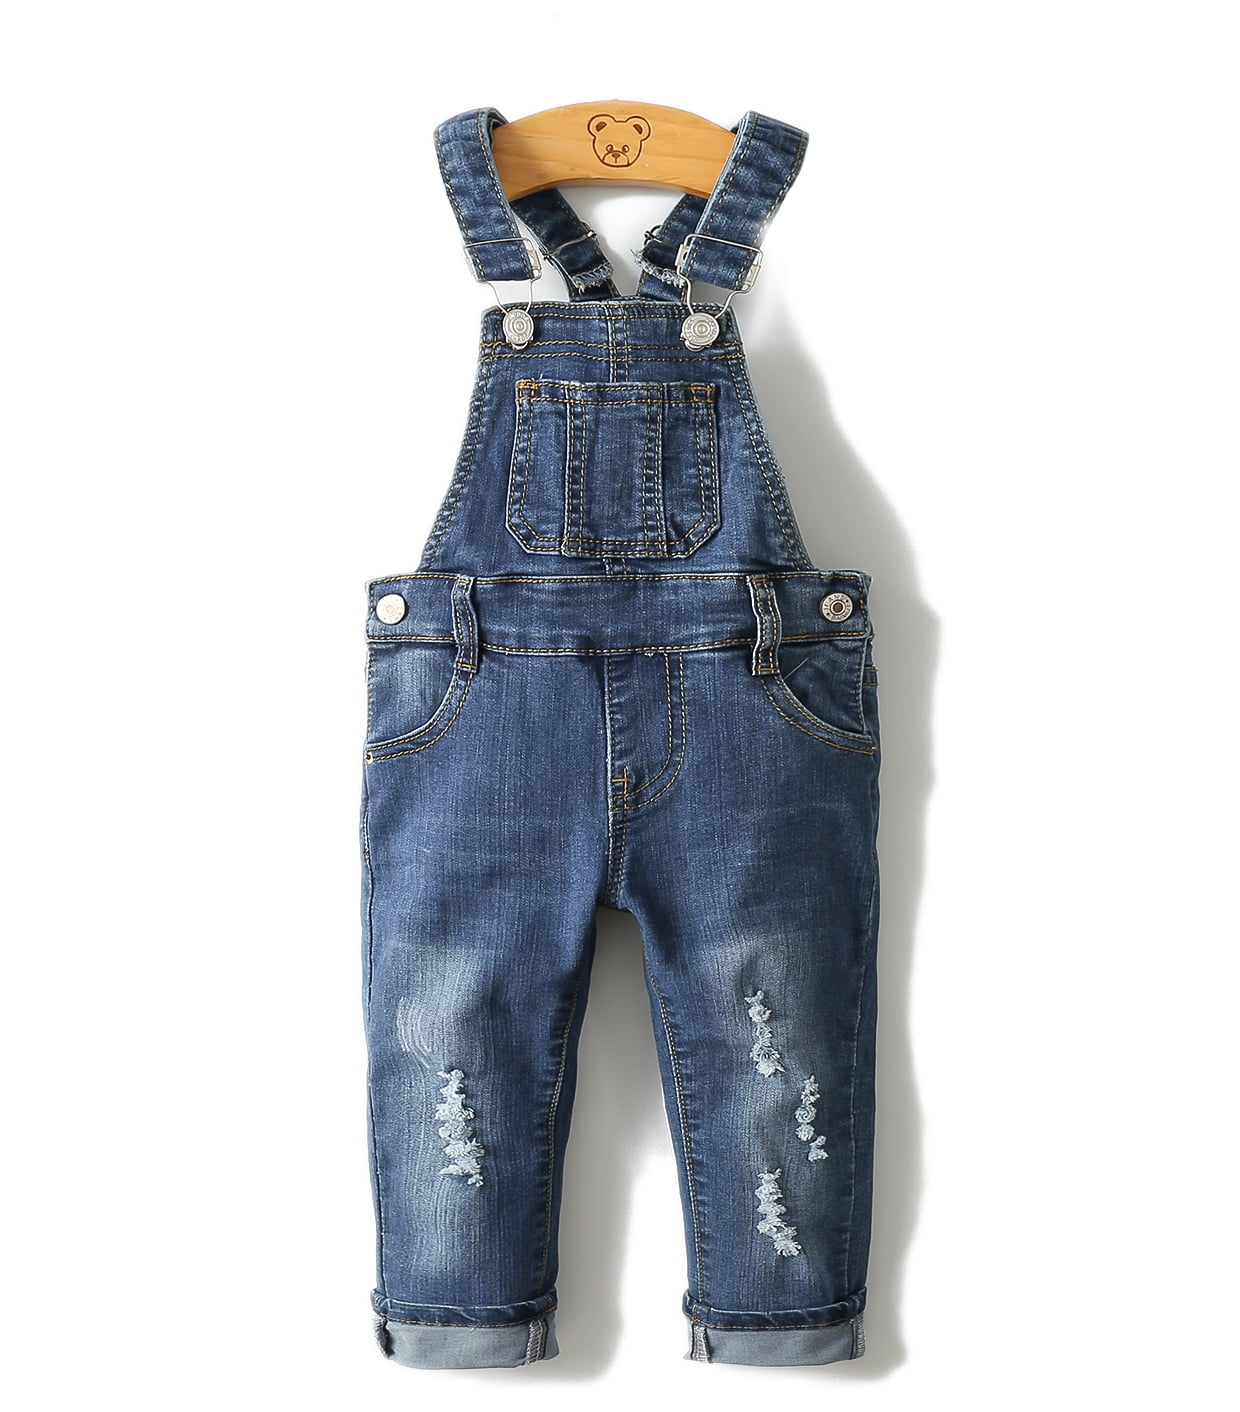 Kidscool Child Ripped Holes Stretchy Stone Washed Soft Slim Jeans Overalls,Light Blue,6-7 Years 